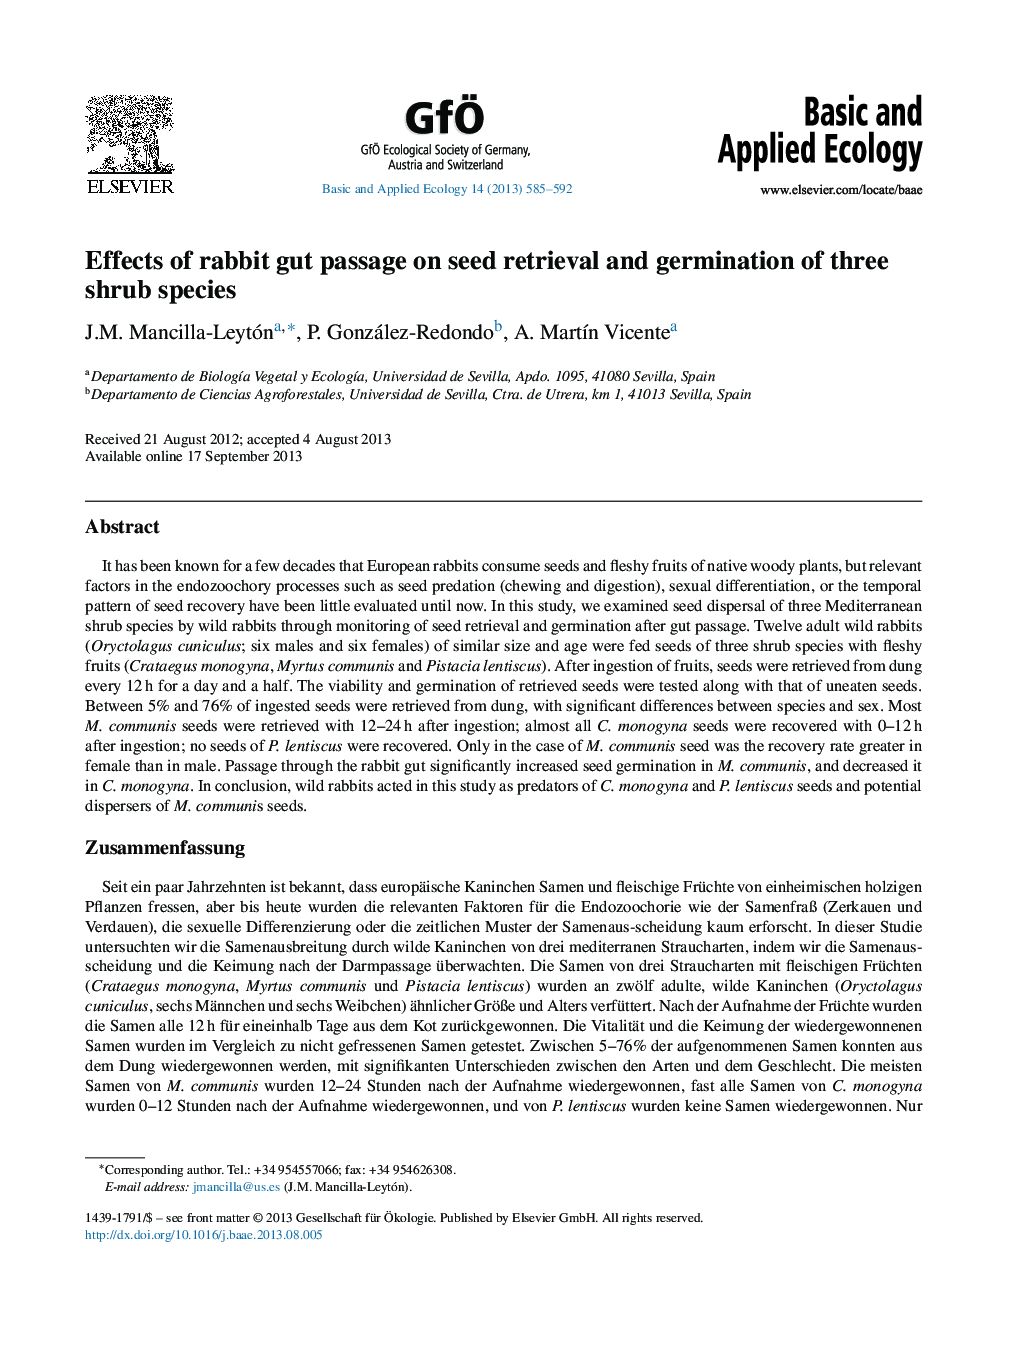 Effects of rabbit gut passage on seed retrieval and germination of three shrub species